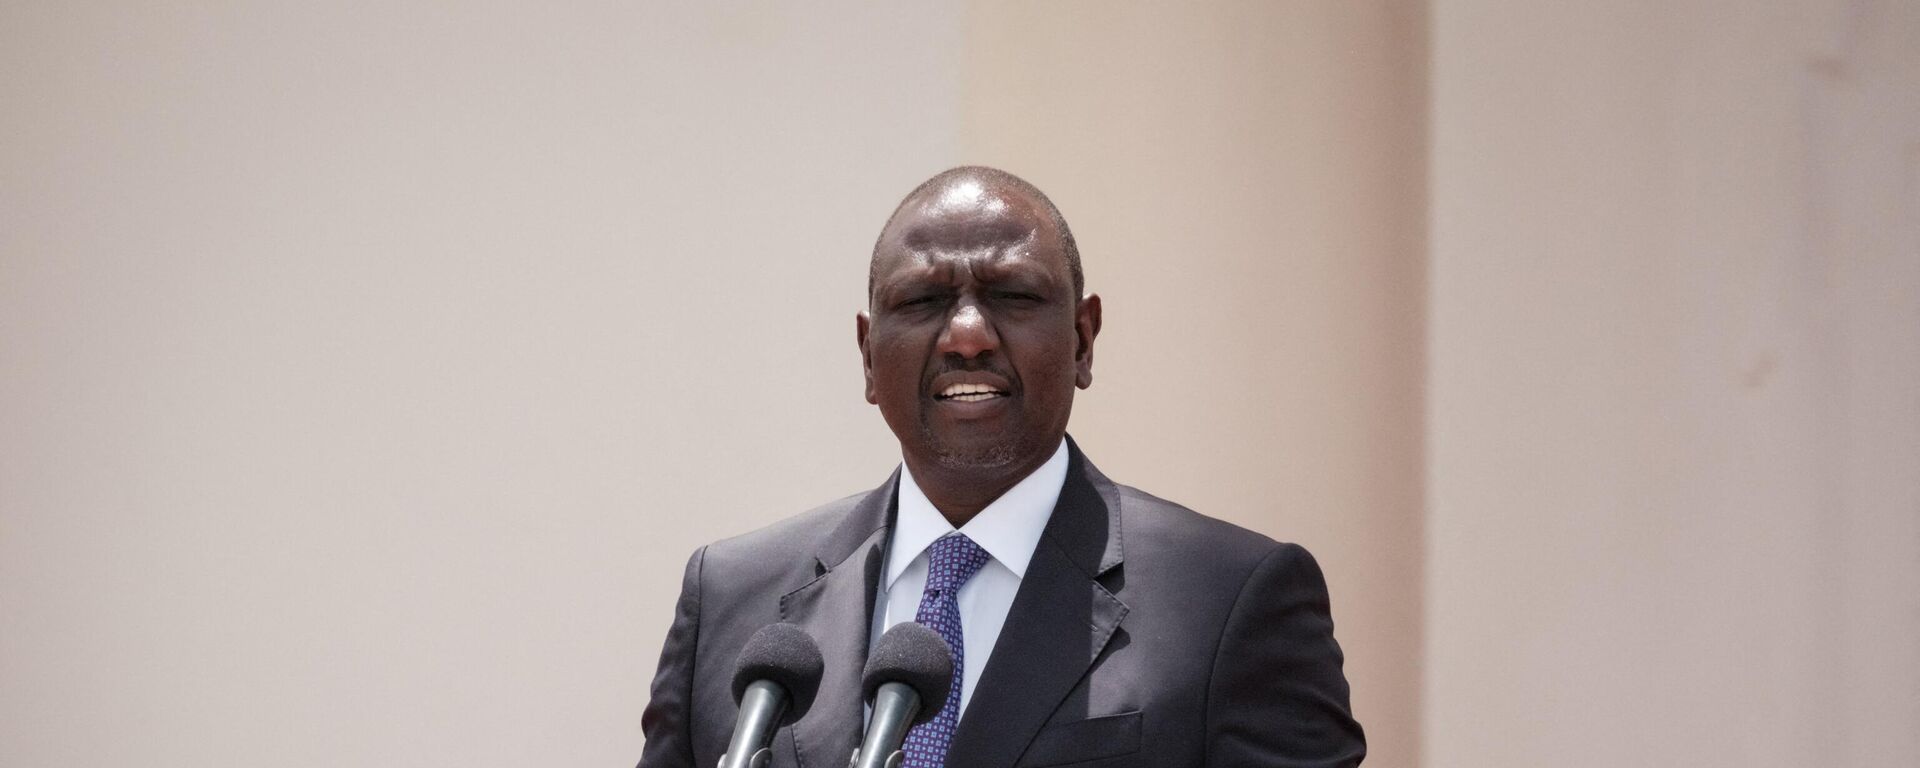 Kenya's President William Ruto speaks during a press conference with Spain's Prime Minister Pedro Sanchez after their meeting at the State House in Nairobi on October 26, 2022. - Sputnik International, 1920, 23.12.2022